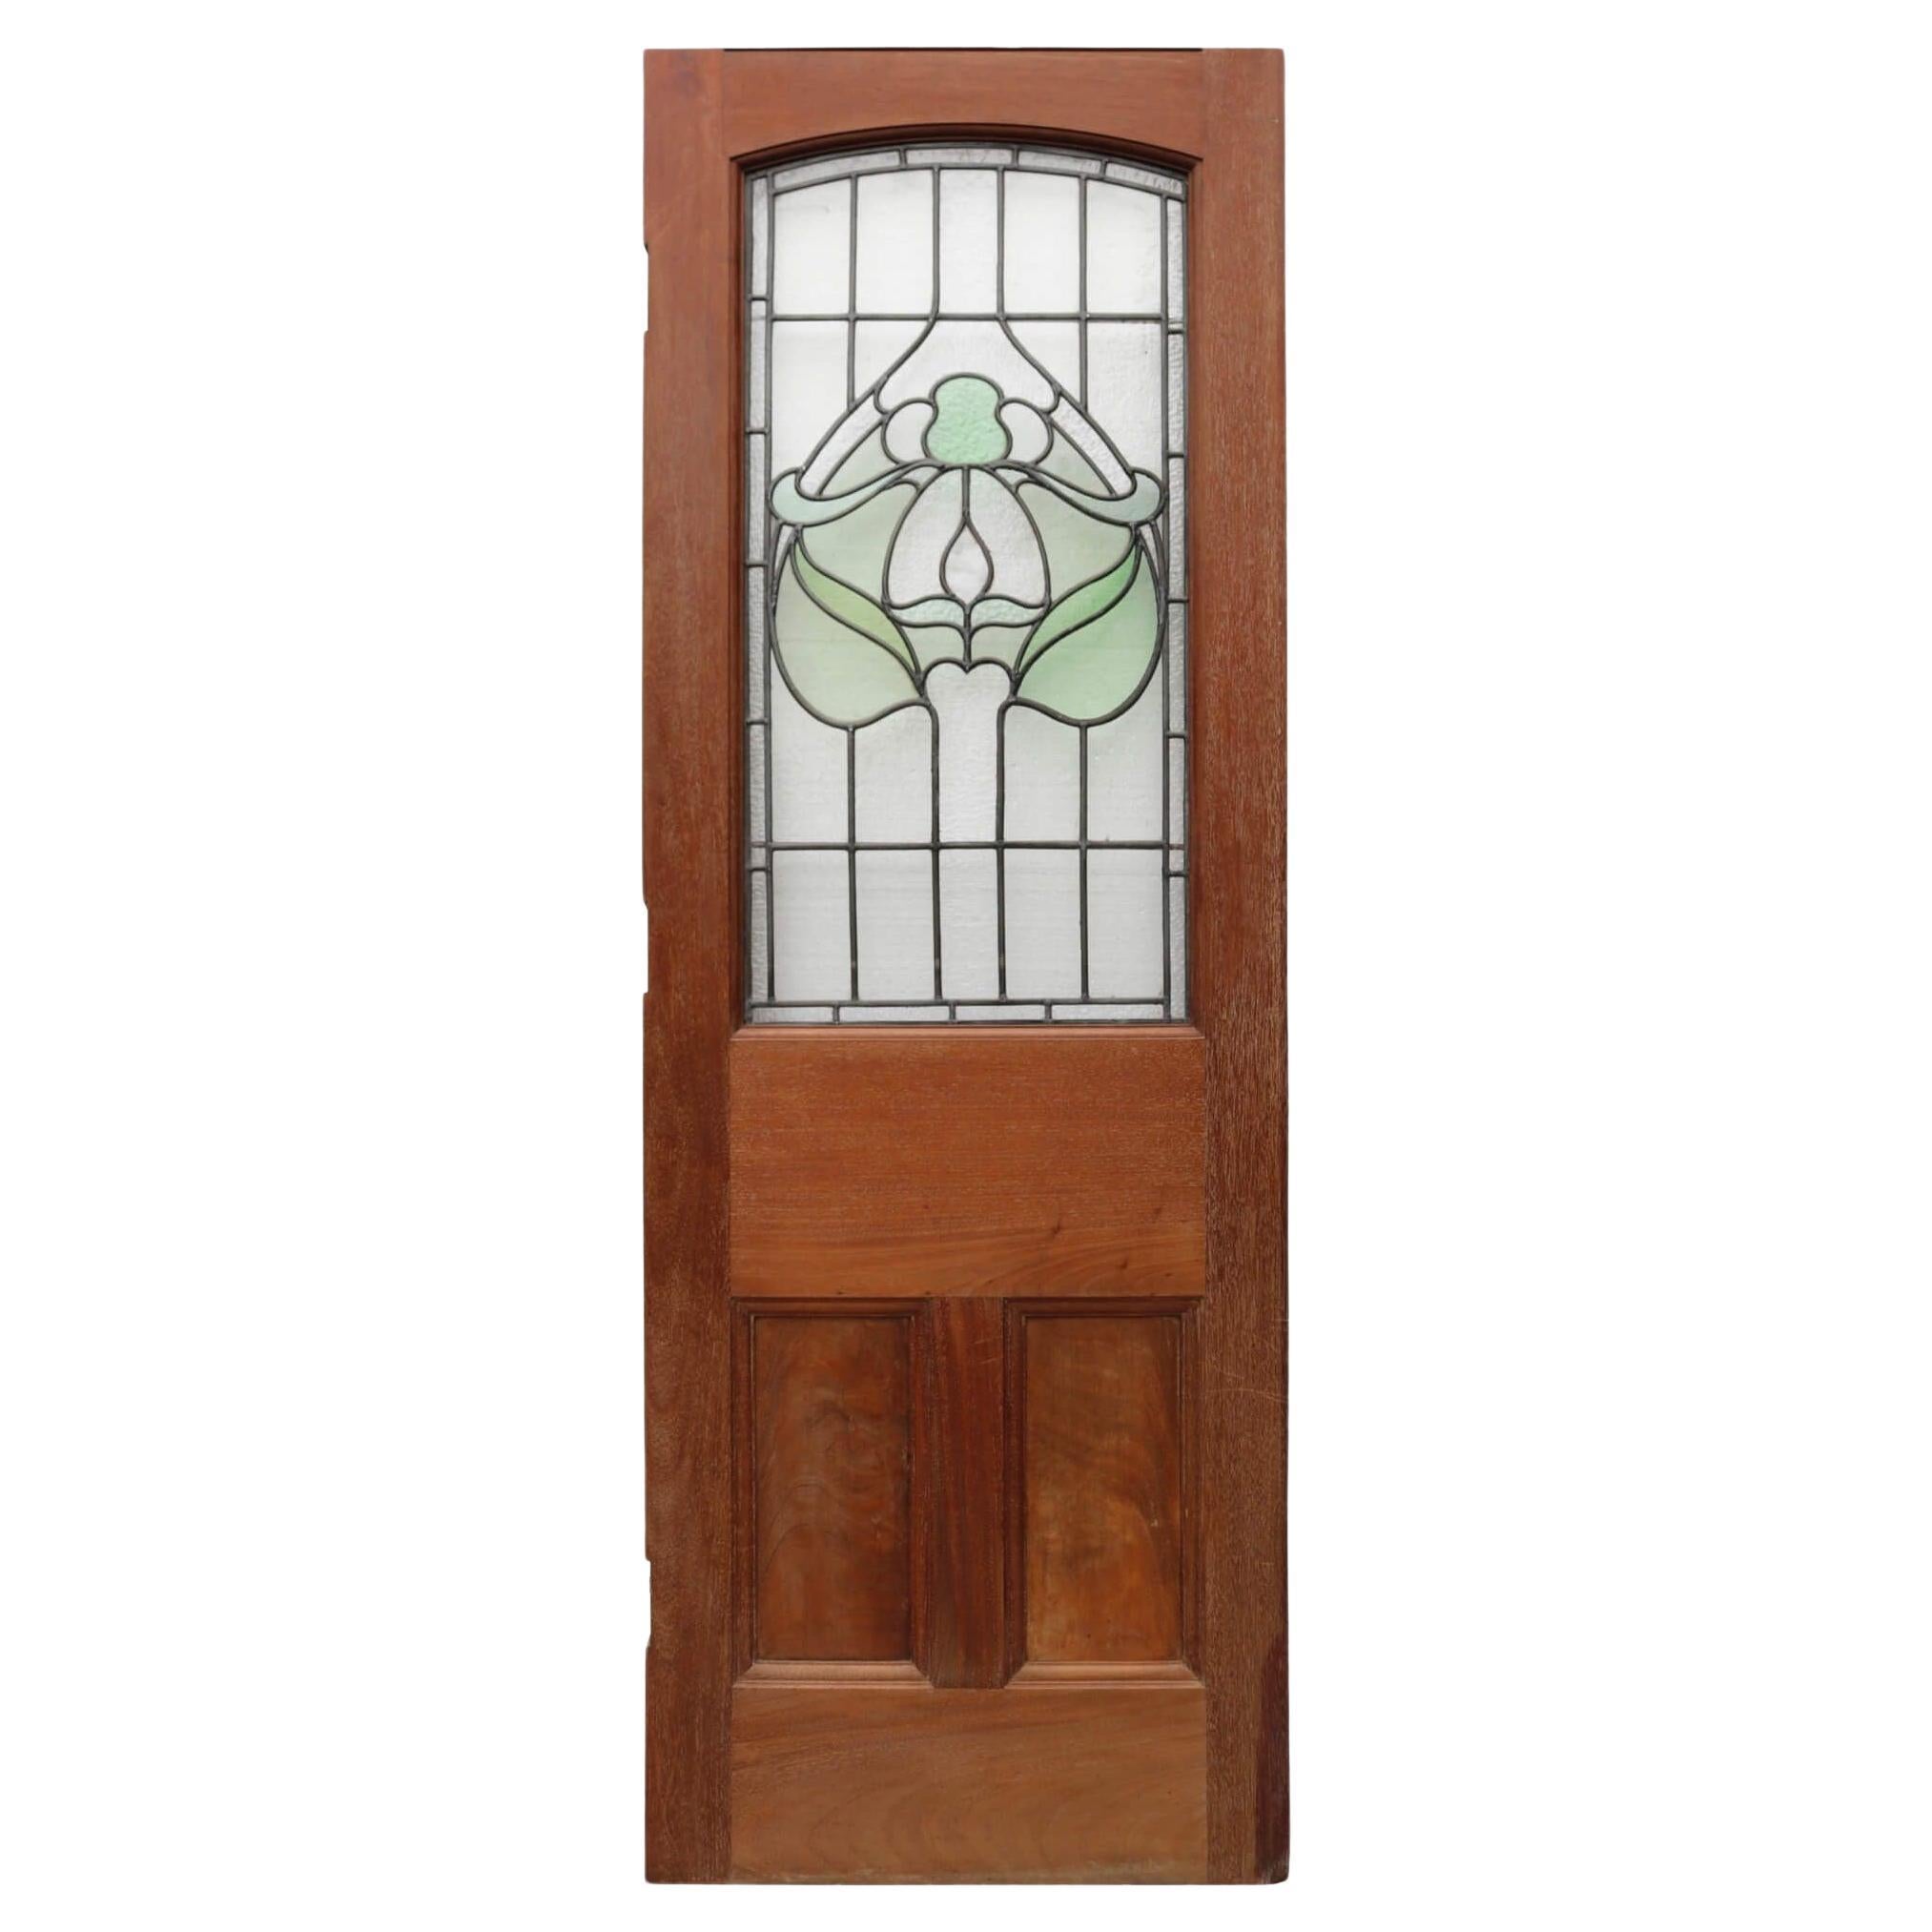 Victorian Internal Door with Stained Glass For Sale